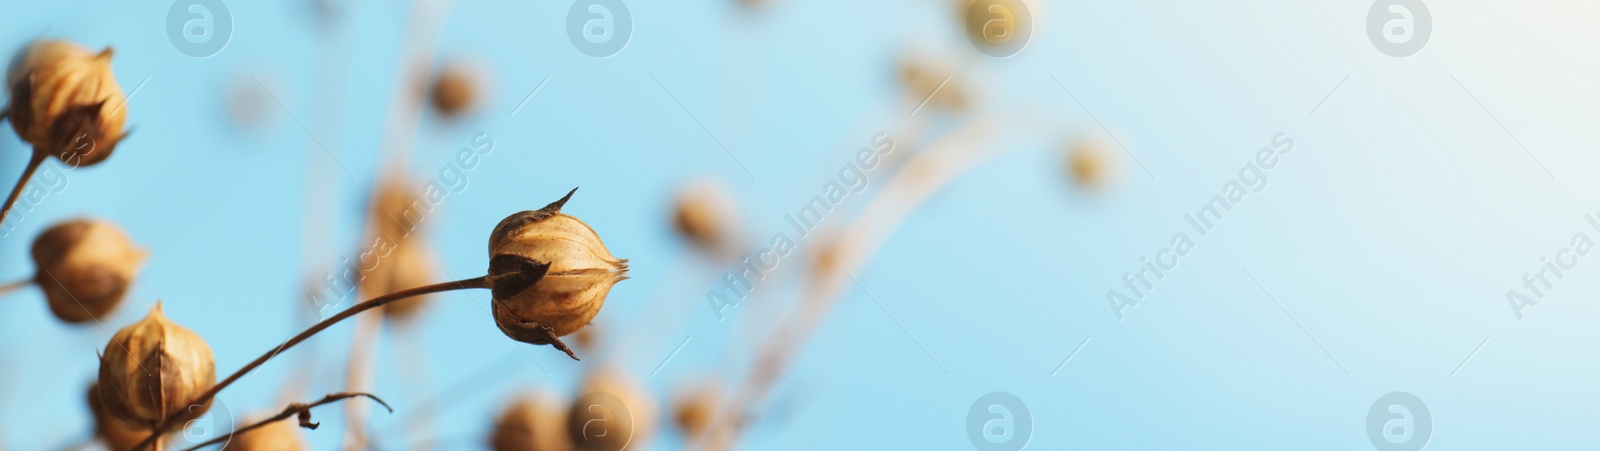 Image of Beautiful dry flax plants against blurred background, closeup view with space for text. Banner design